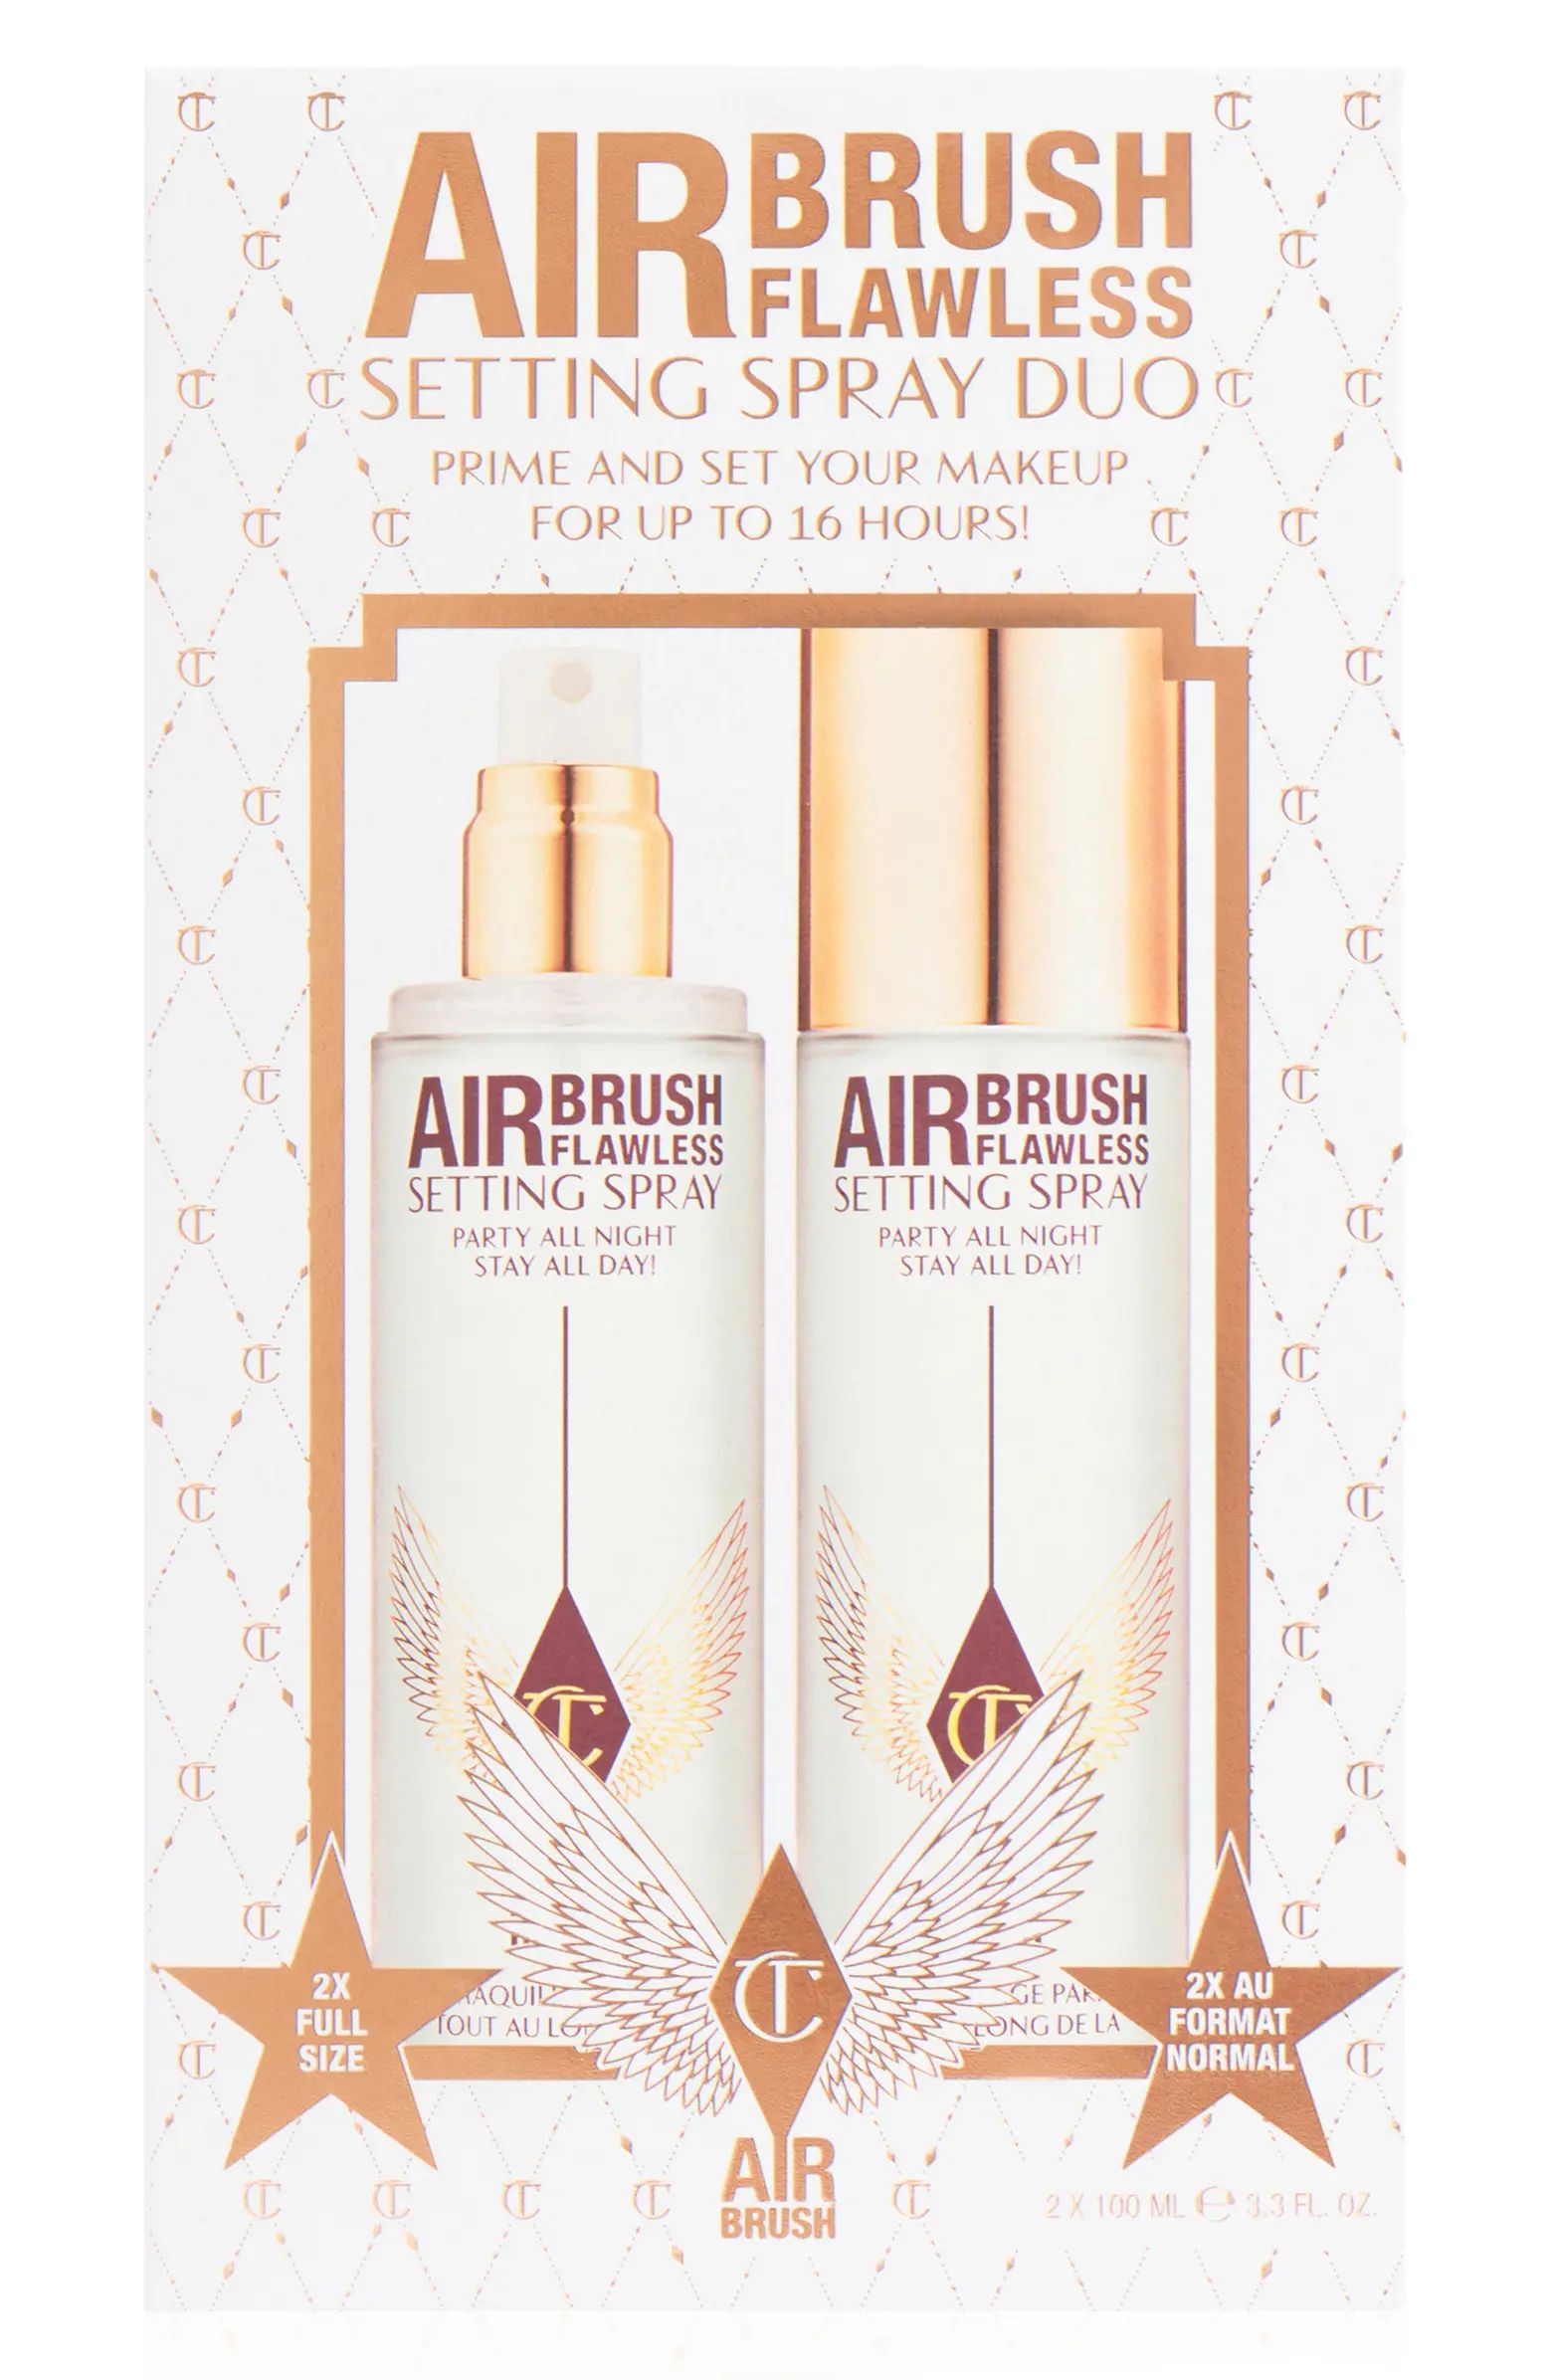 Airbrush Flawless Makeup Setting Spray Duo $76 Value | Nordstrom